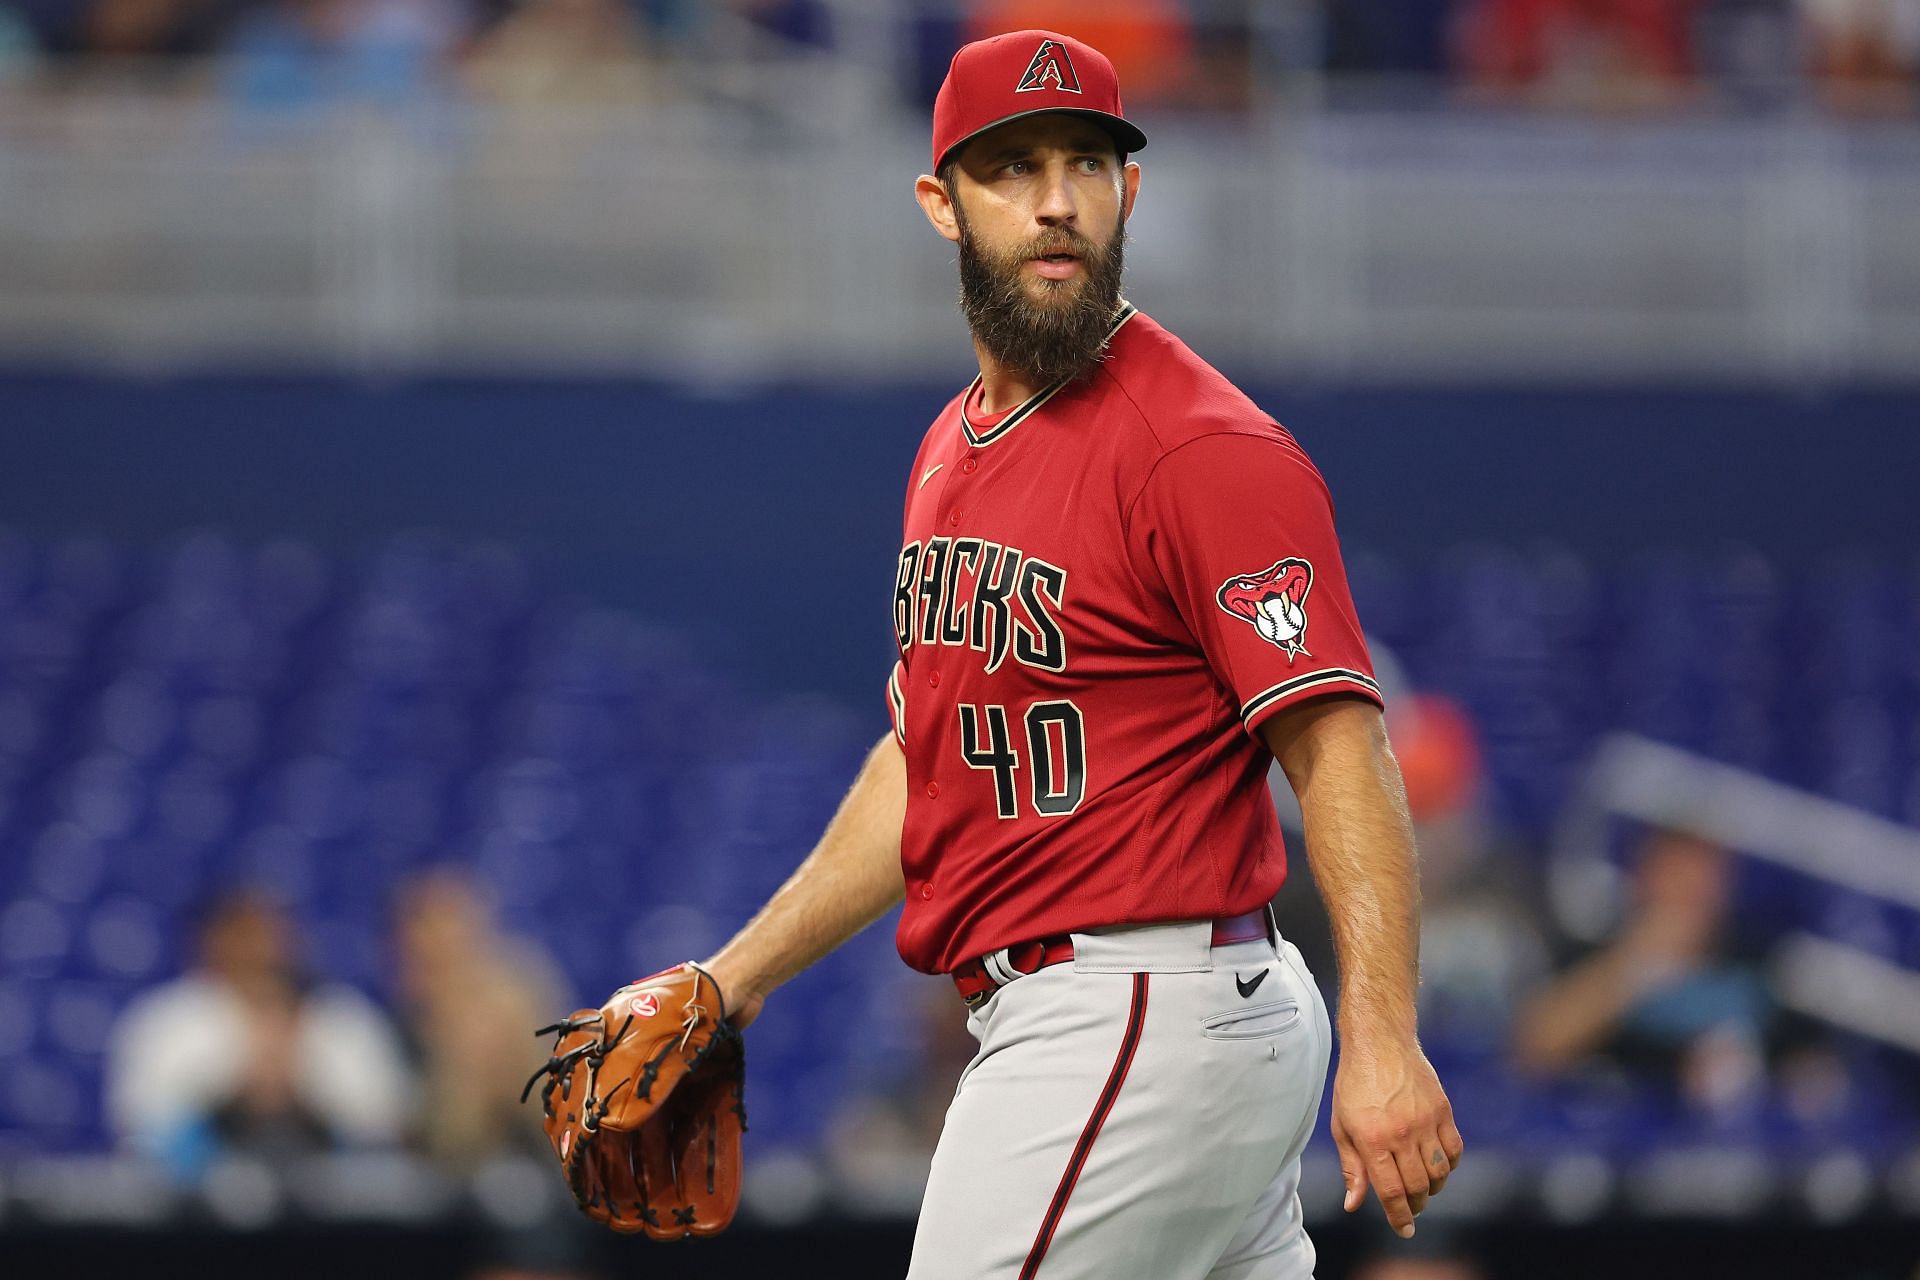 Madison Bumgarner is such a bitter old man, I like guys who play with  fire but man, Madison Bumgarner is sickening - Twitter reacts to Arizona  Diamondbacks pitcher getting ejected after one